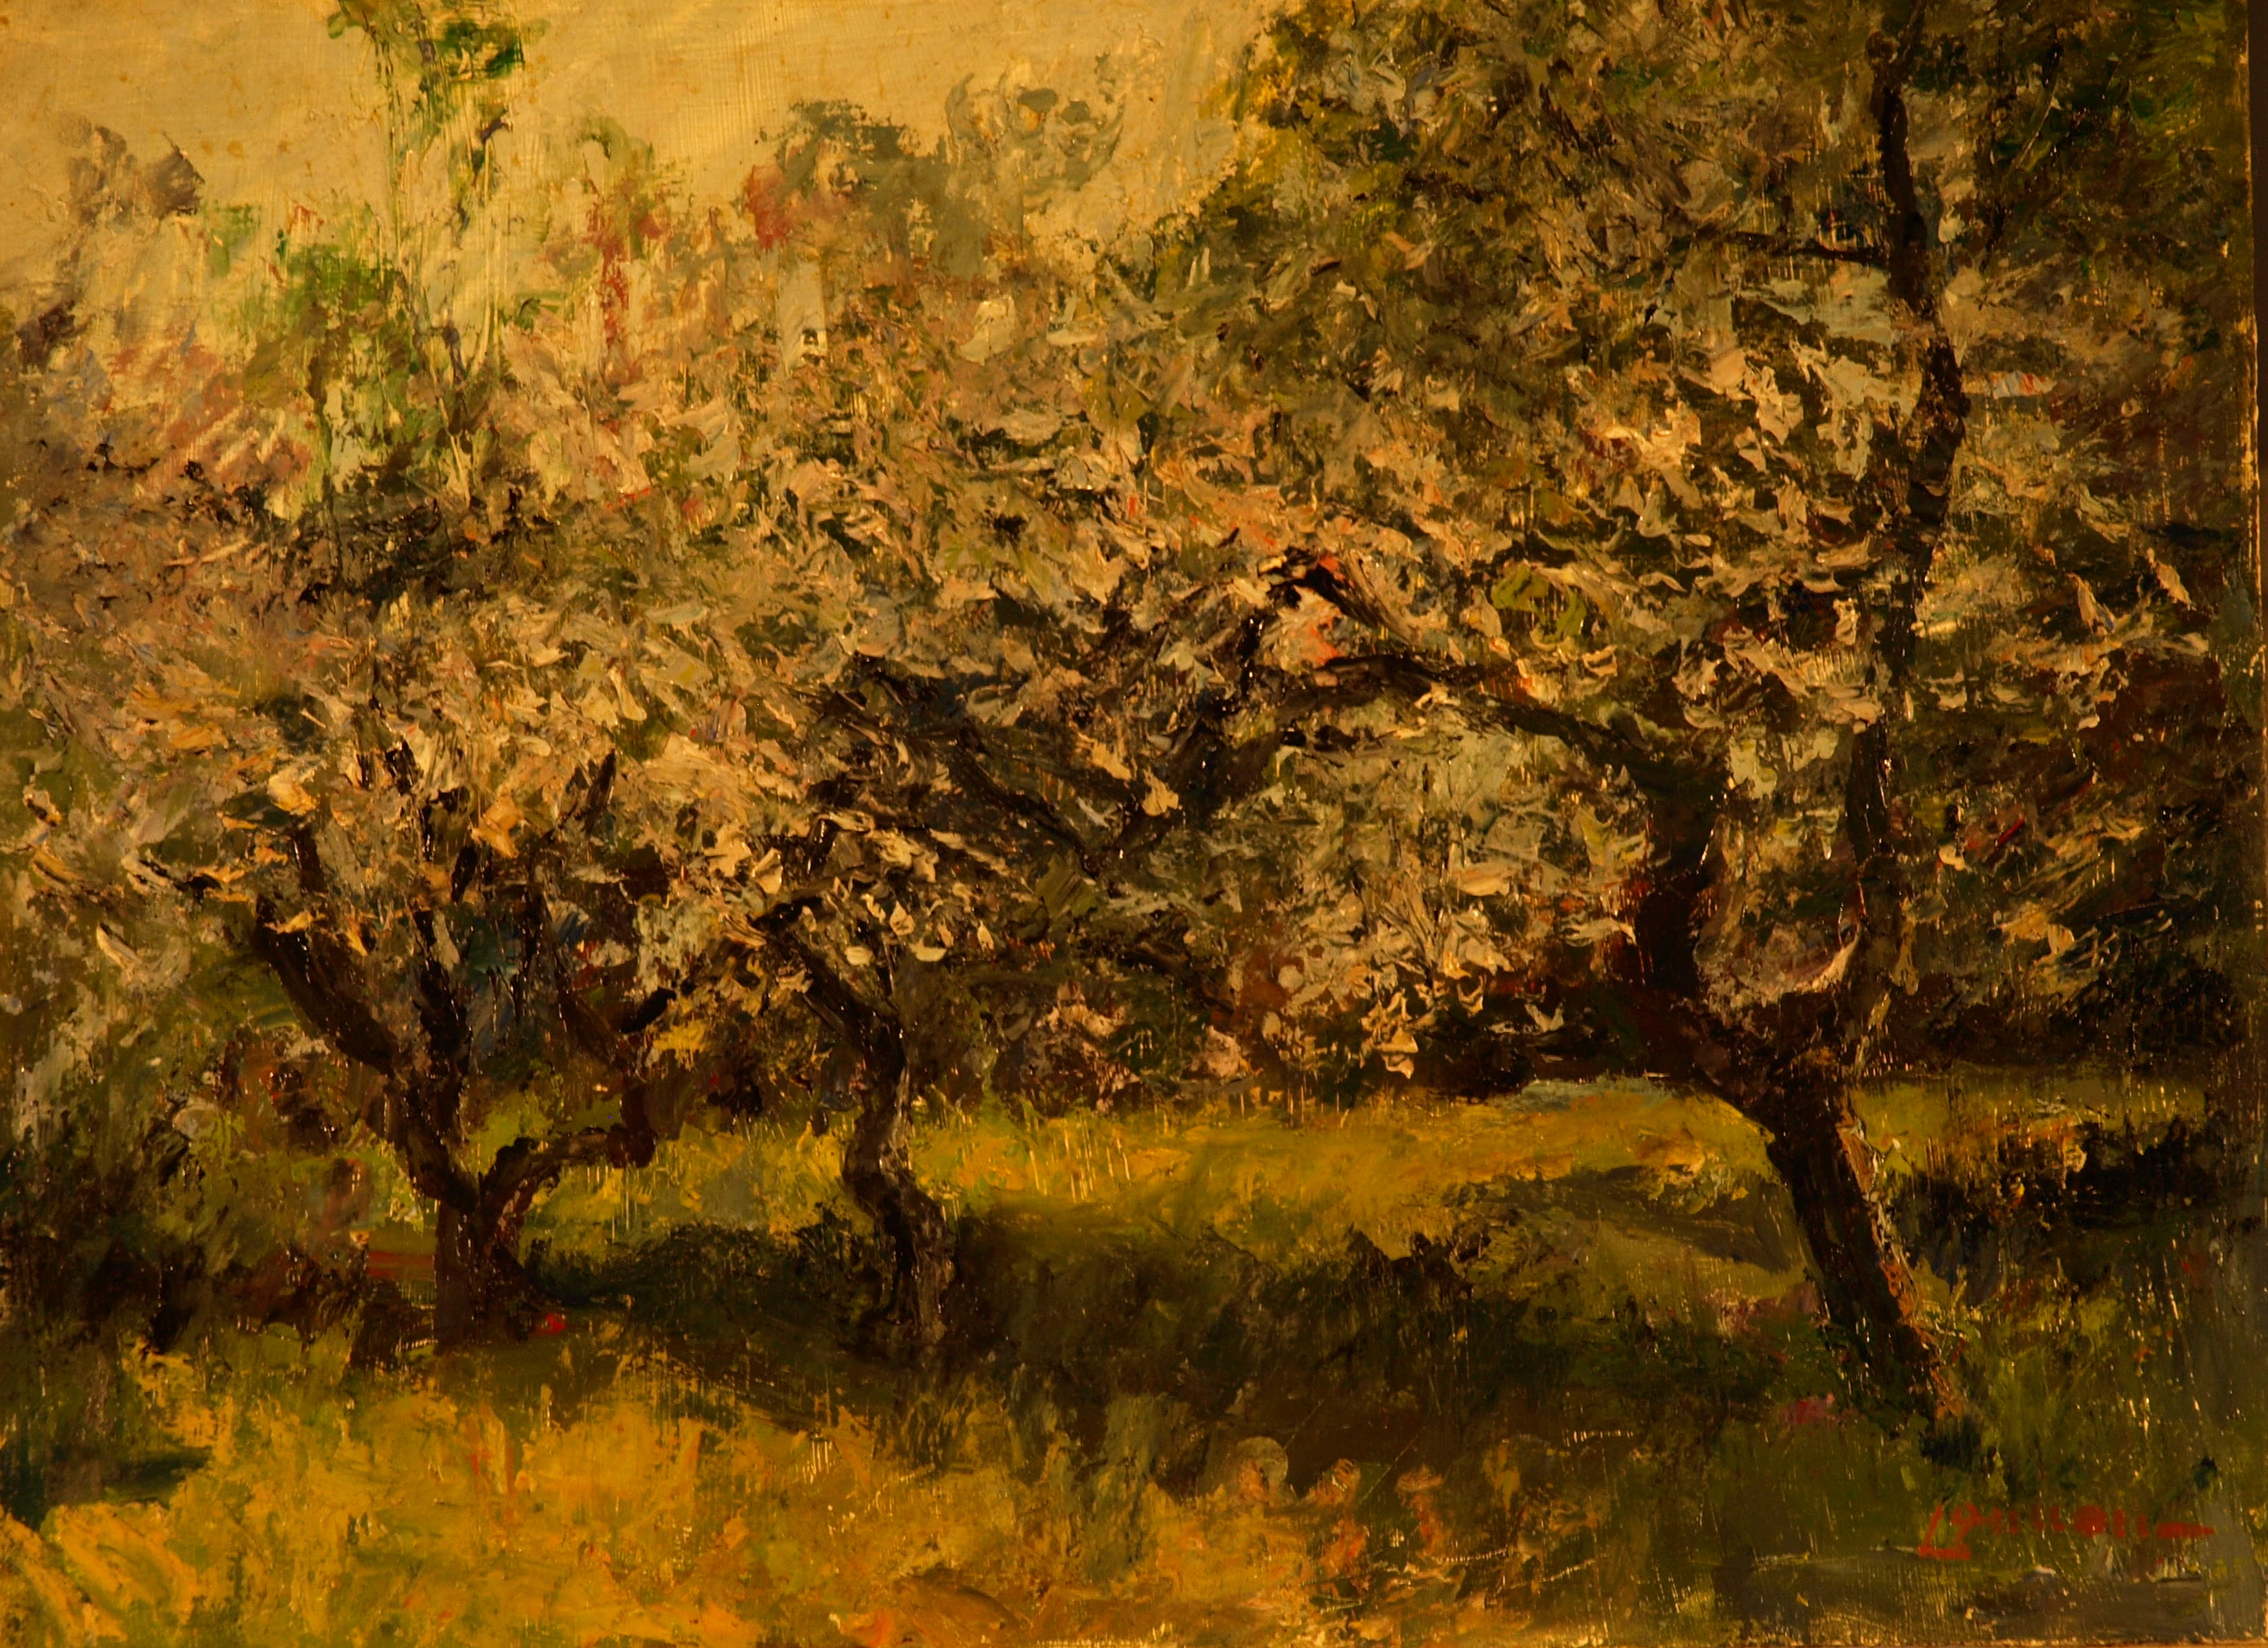 Apple Blossom Time, Oil on Panel, 12 x 16 Inches, by Bernard Lennon, $400